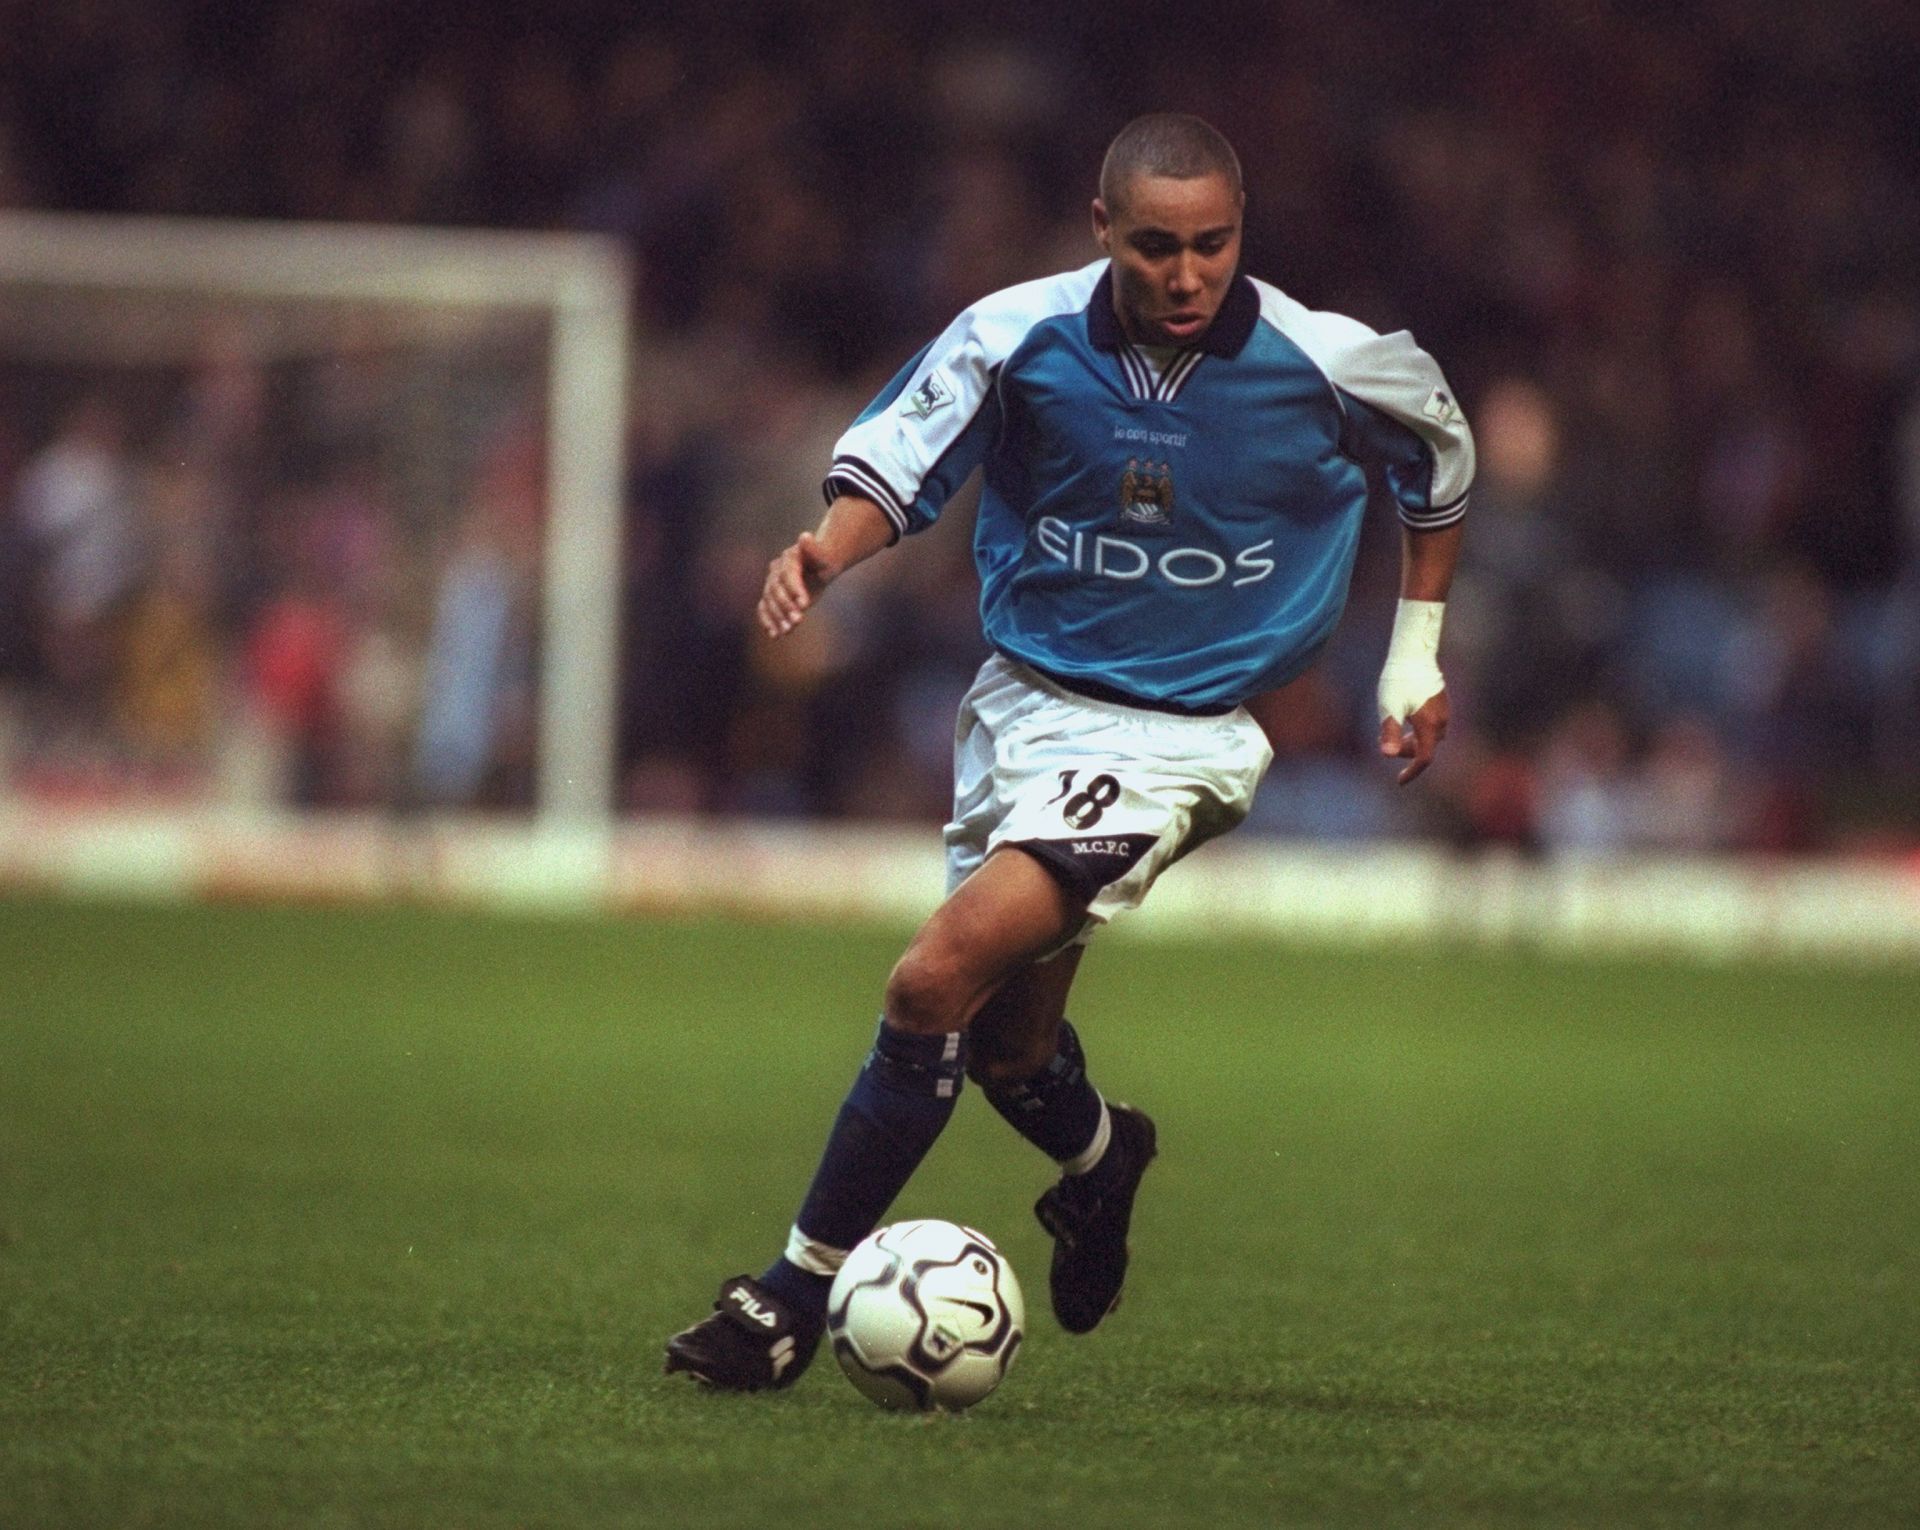 Jeff Whitley became an inspiration for young footballers after battling drug addiction